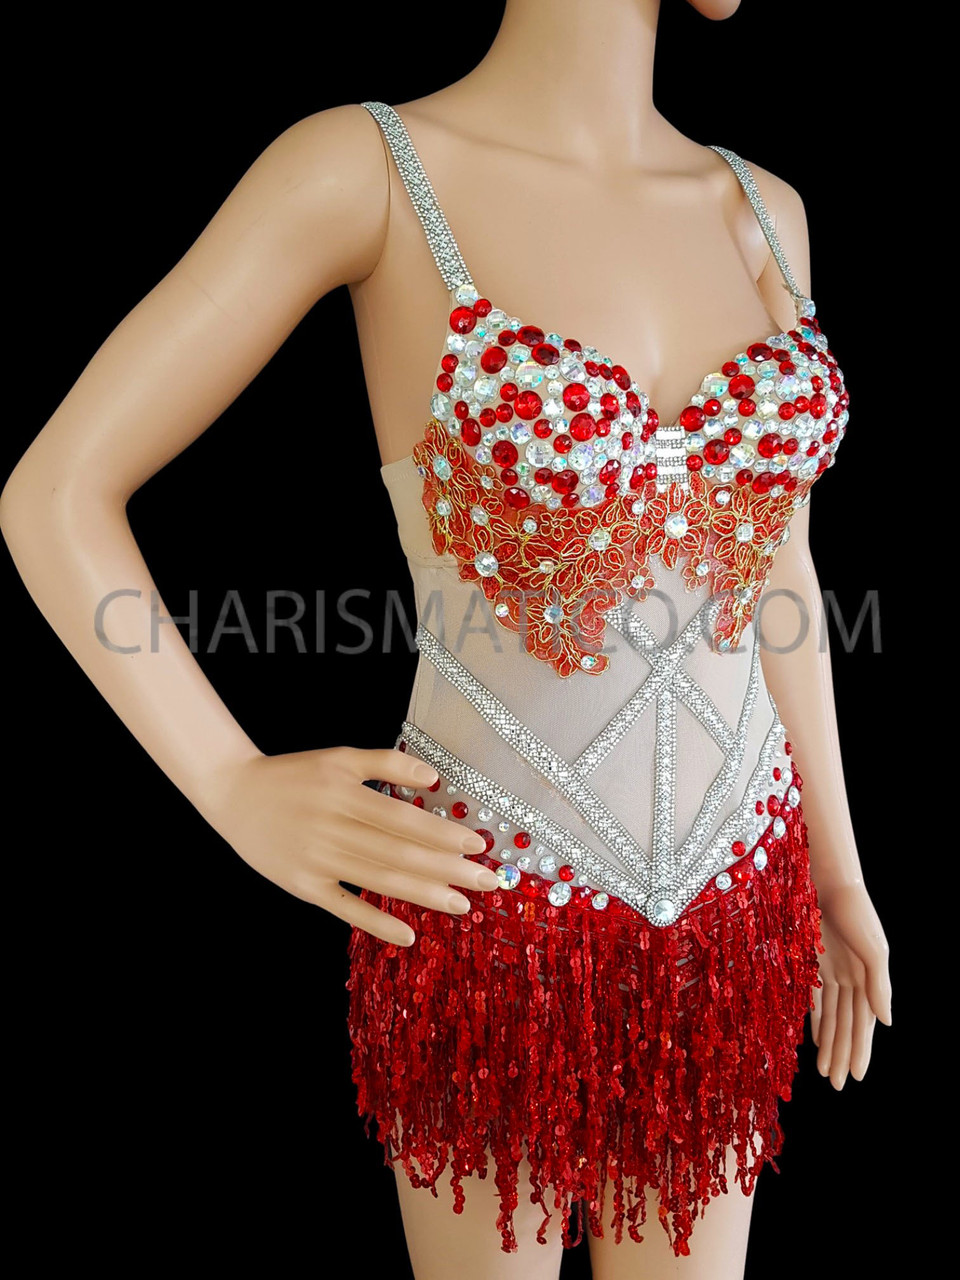 Red And White Crystals On The Diva Show Girl's Leotard